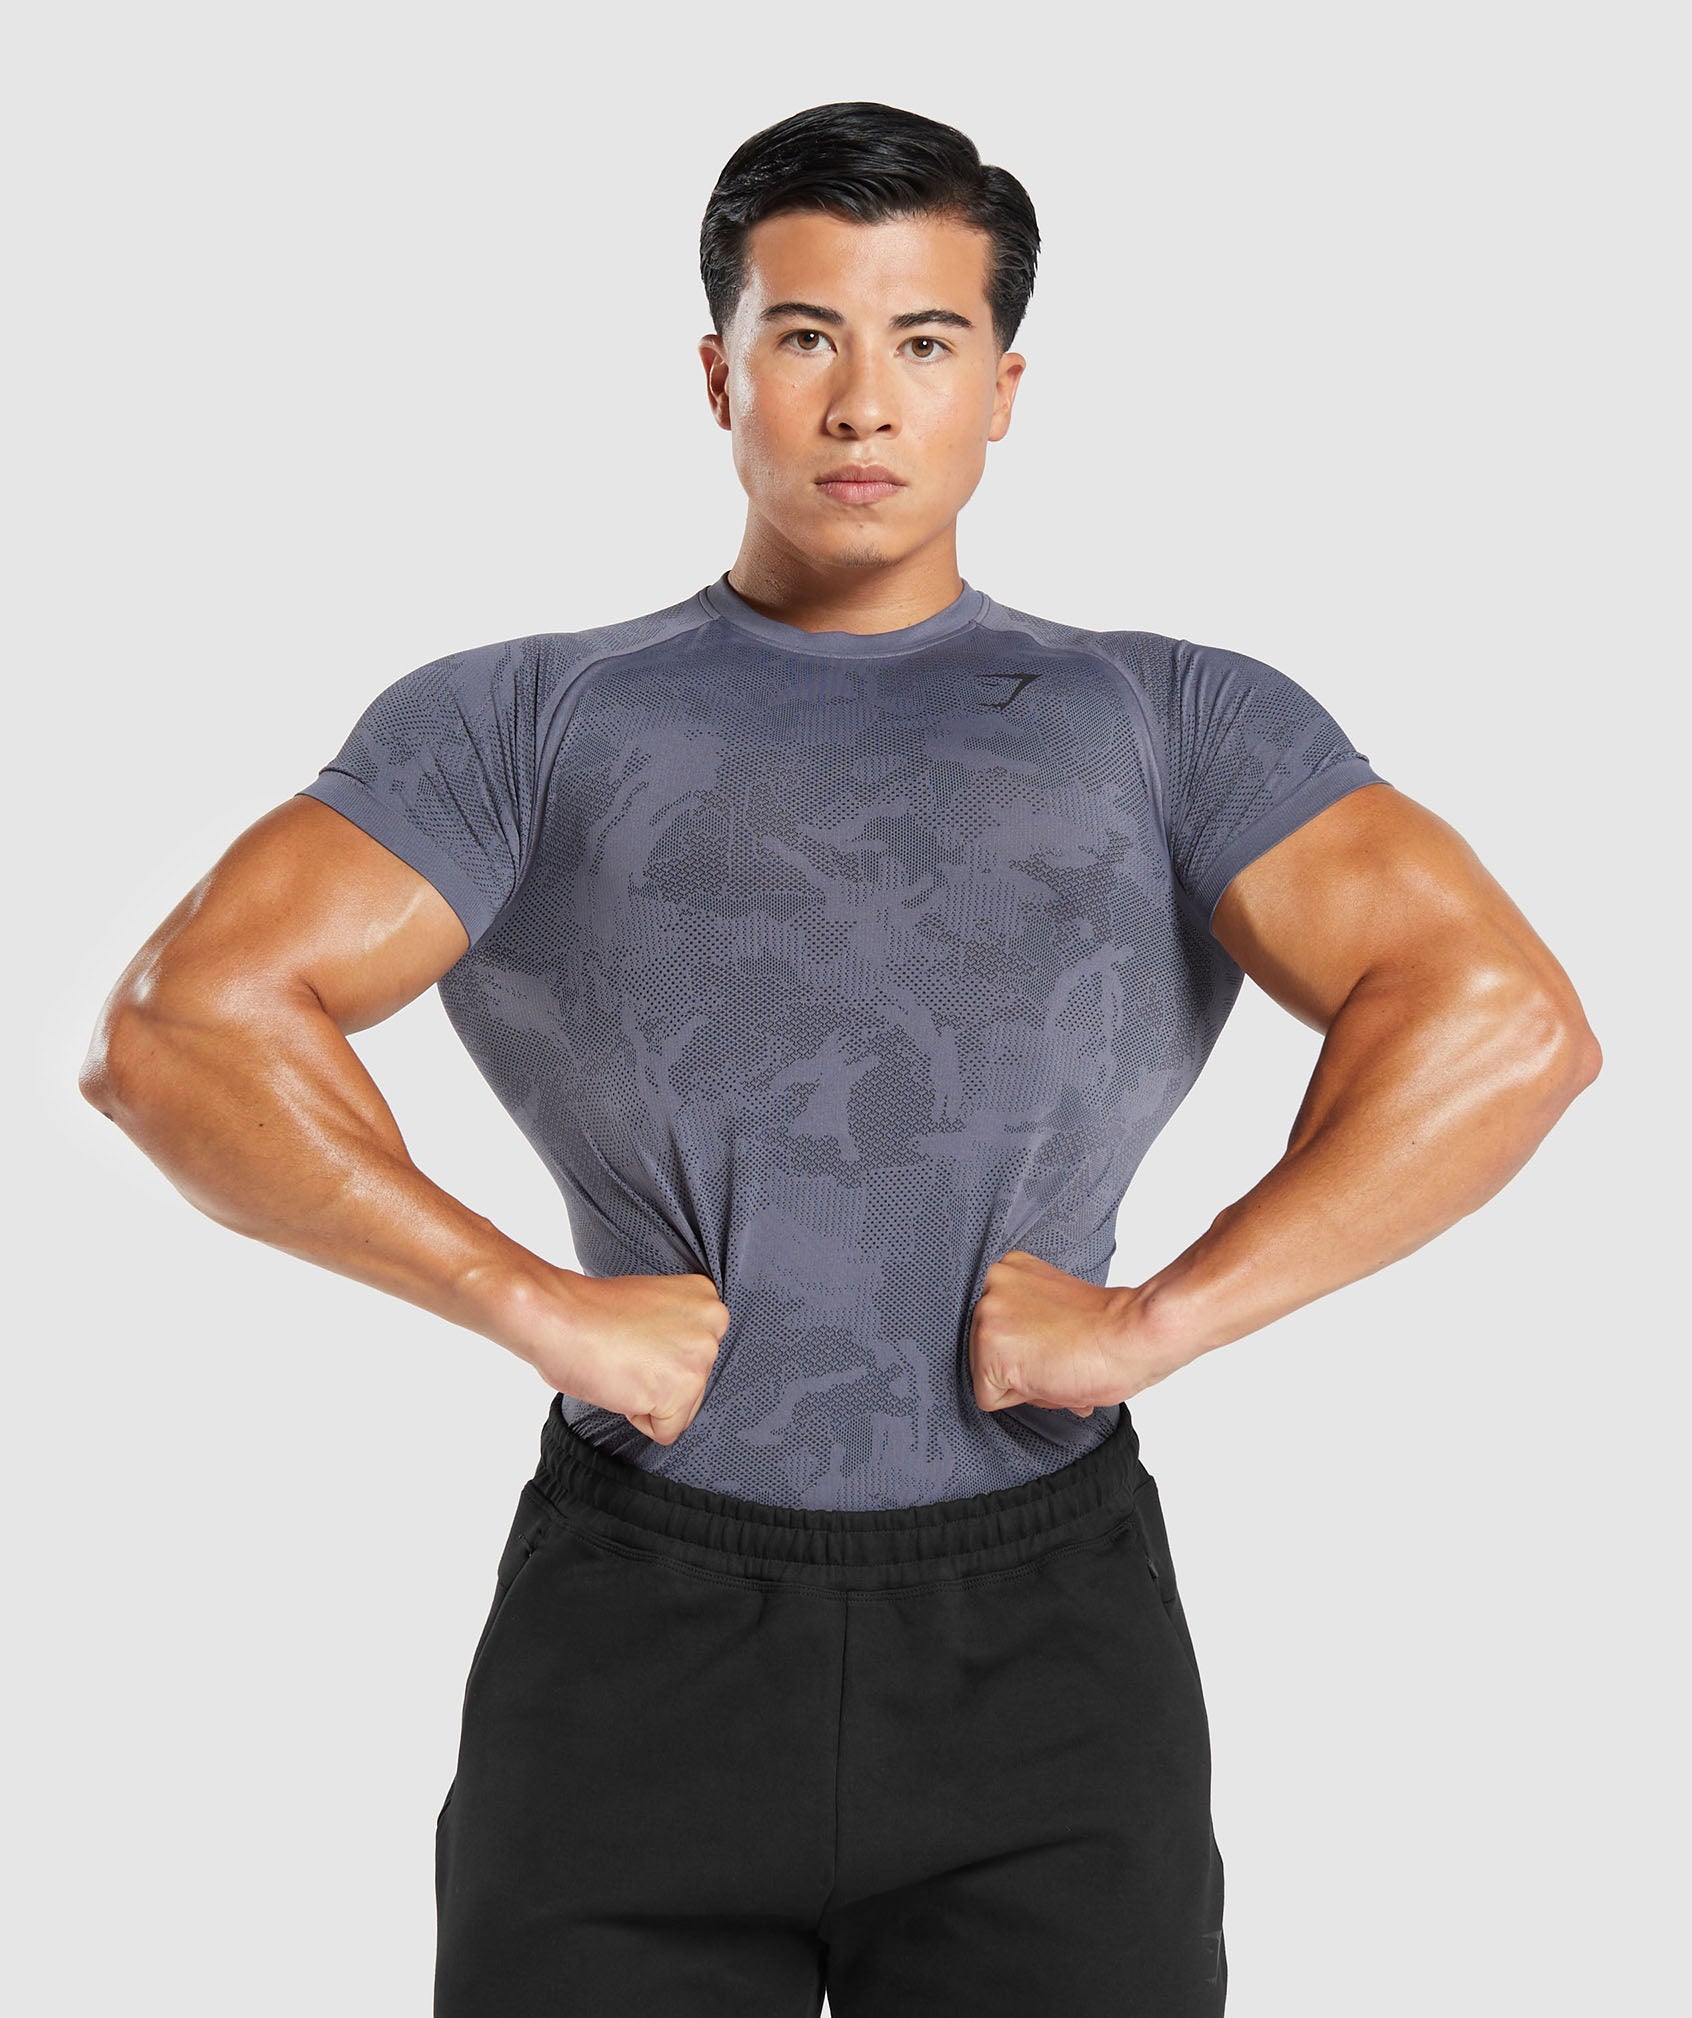 Gymshark on X: BTW, this is more than just a T-Shirt. Join the